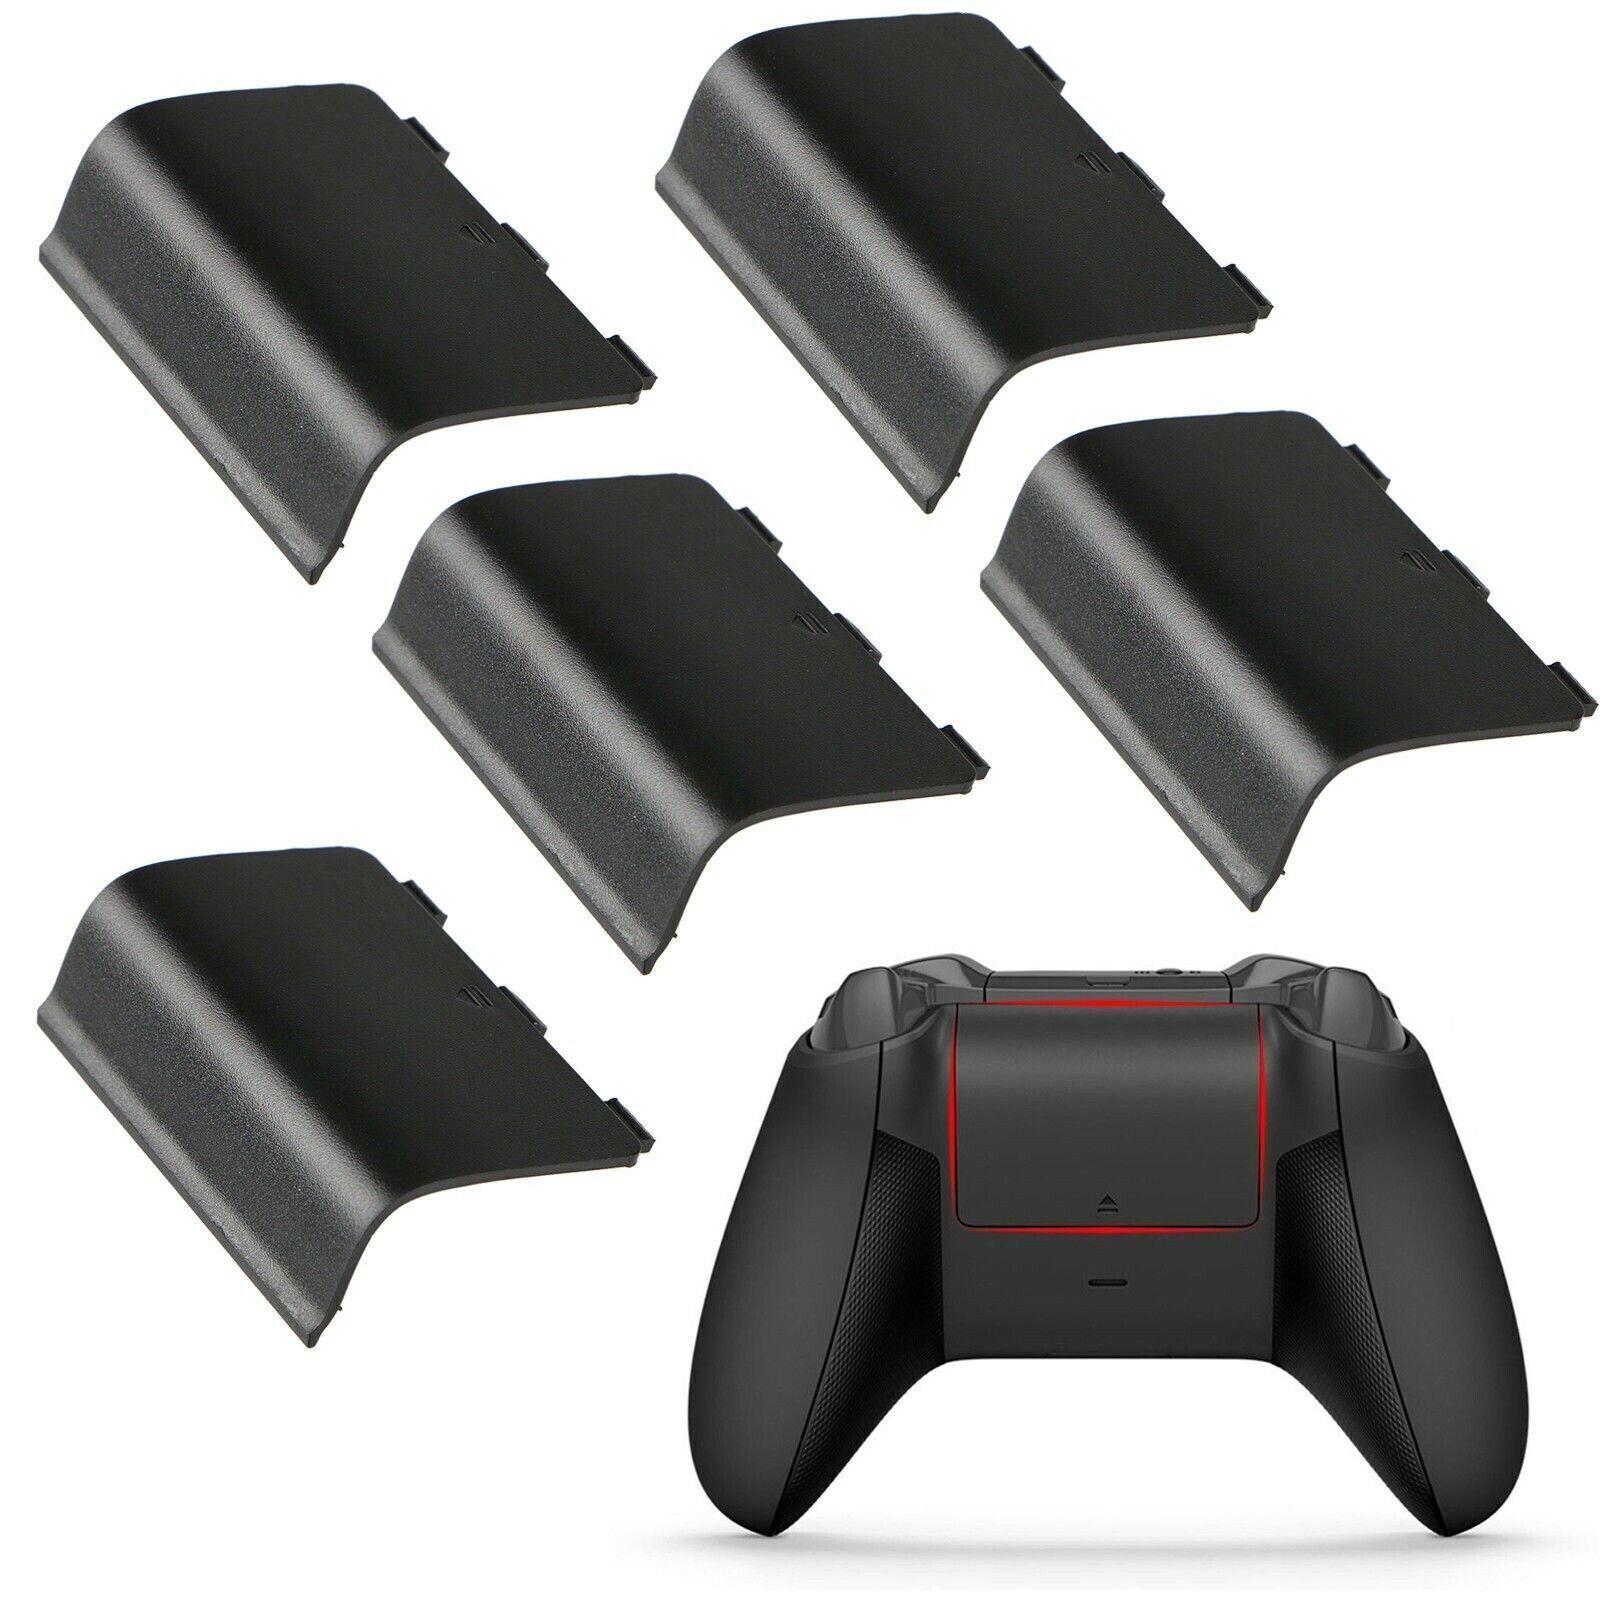 5 Battery Cover Back Lid Wireless Controller Replacement For Xbox One Black Unbranded Does not apply